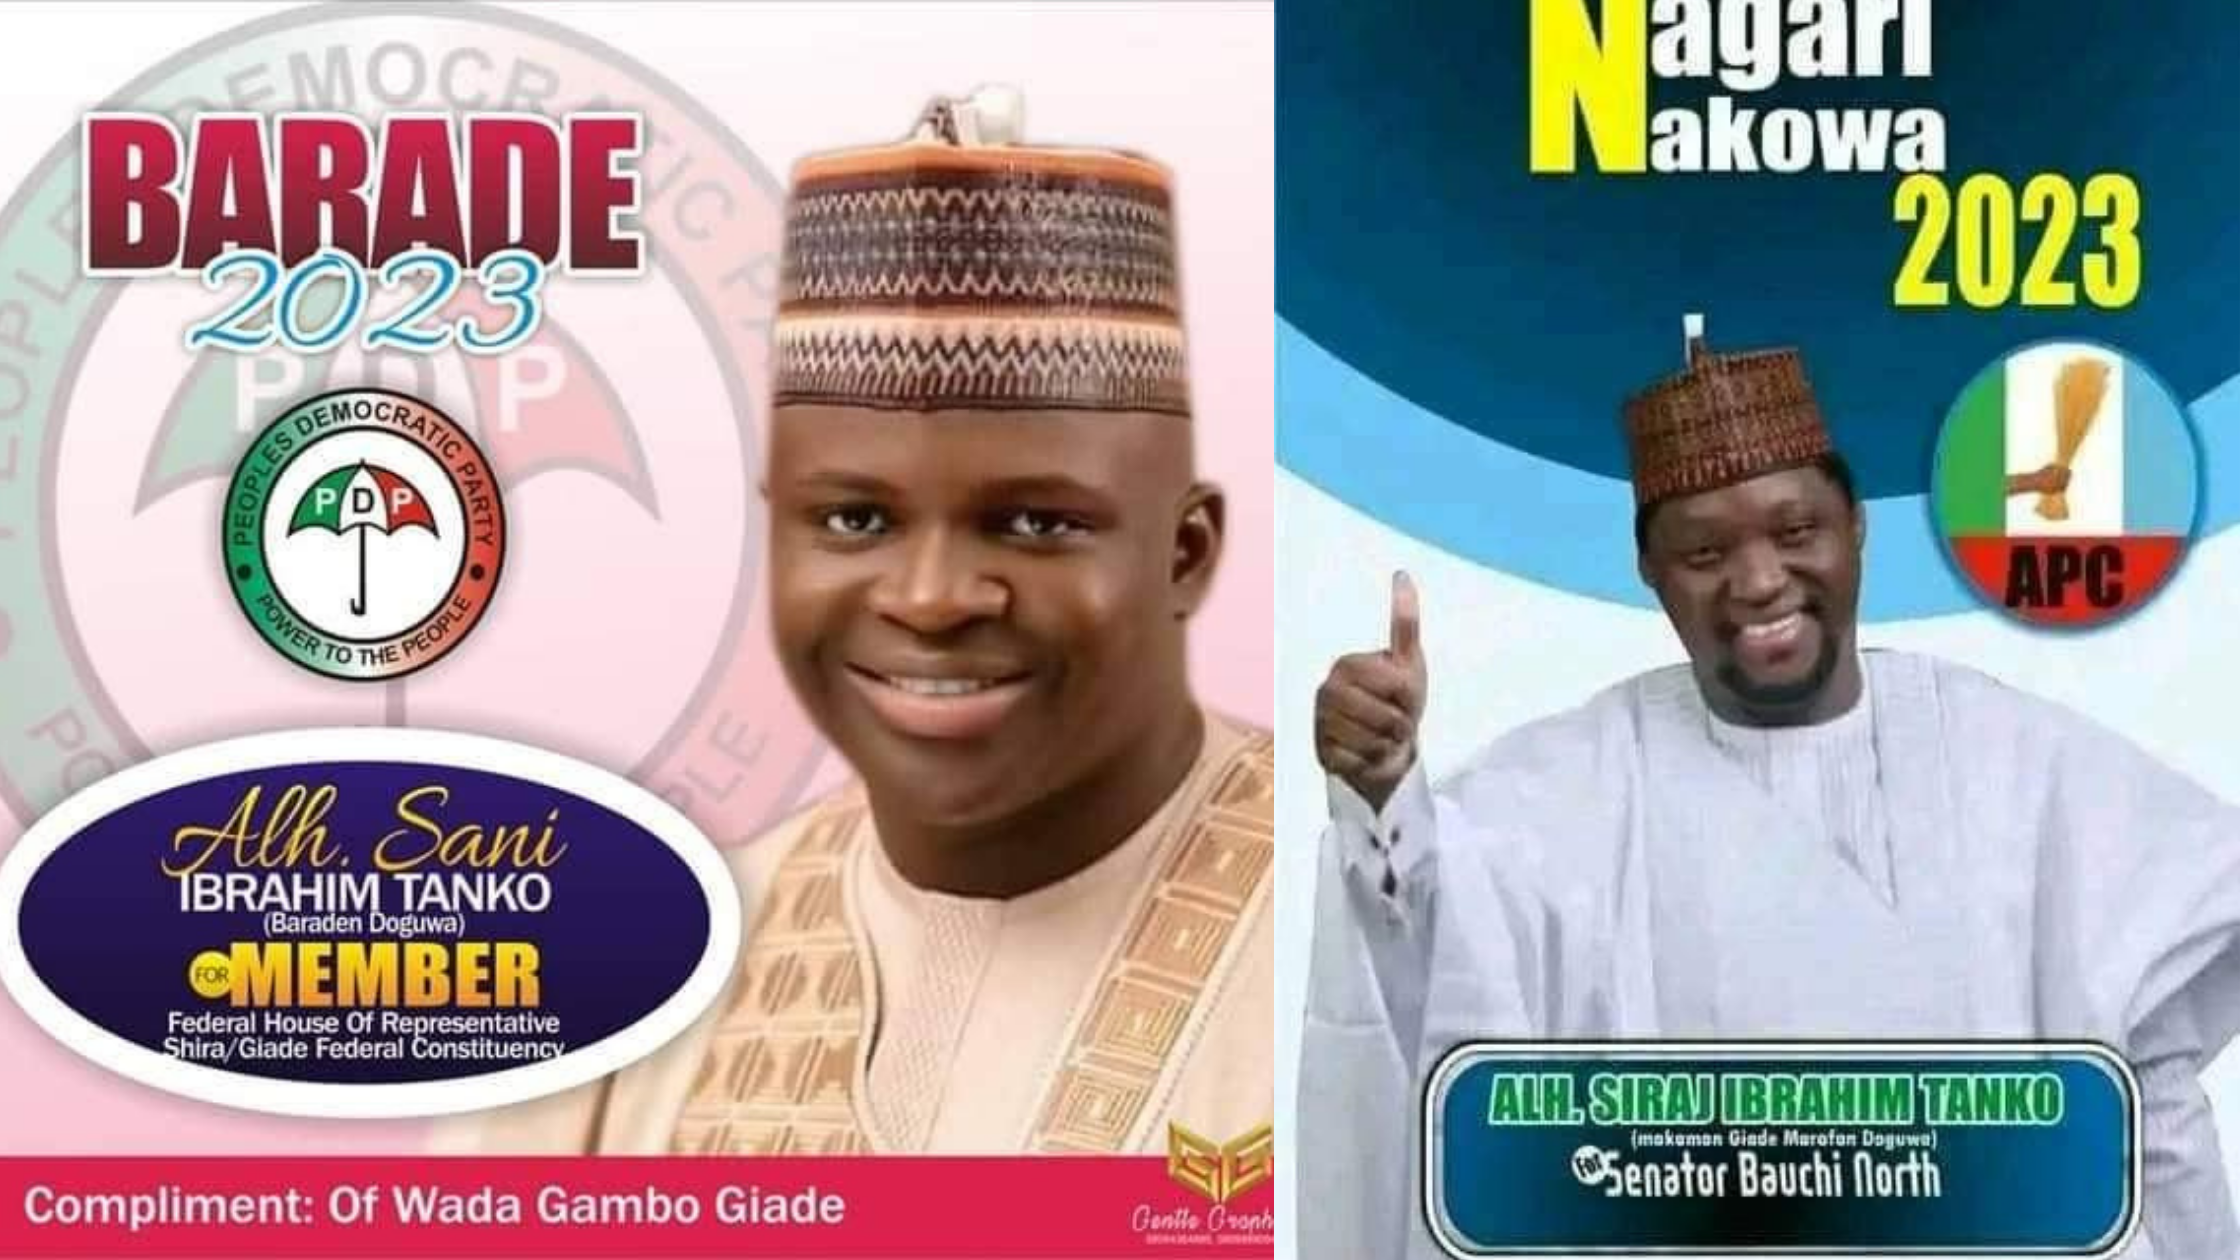 EXCLUSIVE: Chief Justice Of Nigeria, Tanko’s Two Sons Win National Assembly Tickets Of APC, PDP Parties After Distributing Vehicles To Delegates